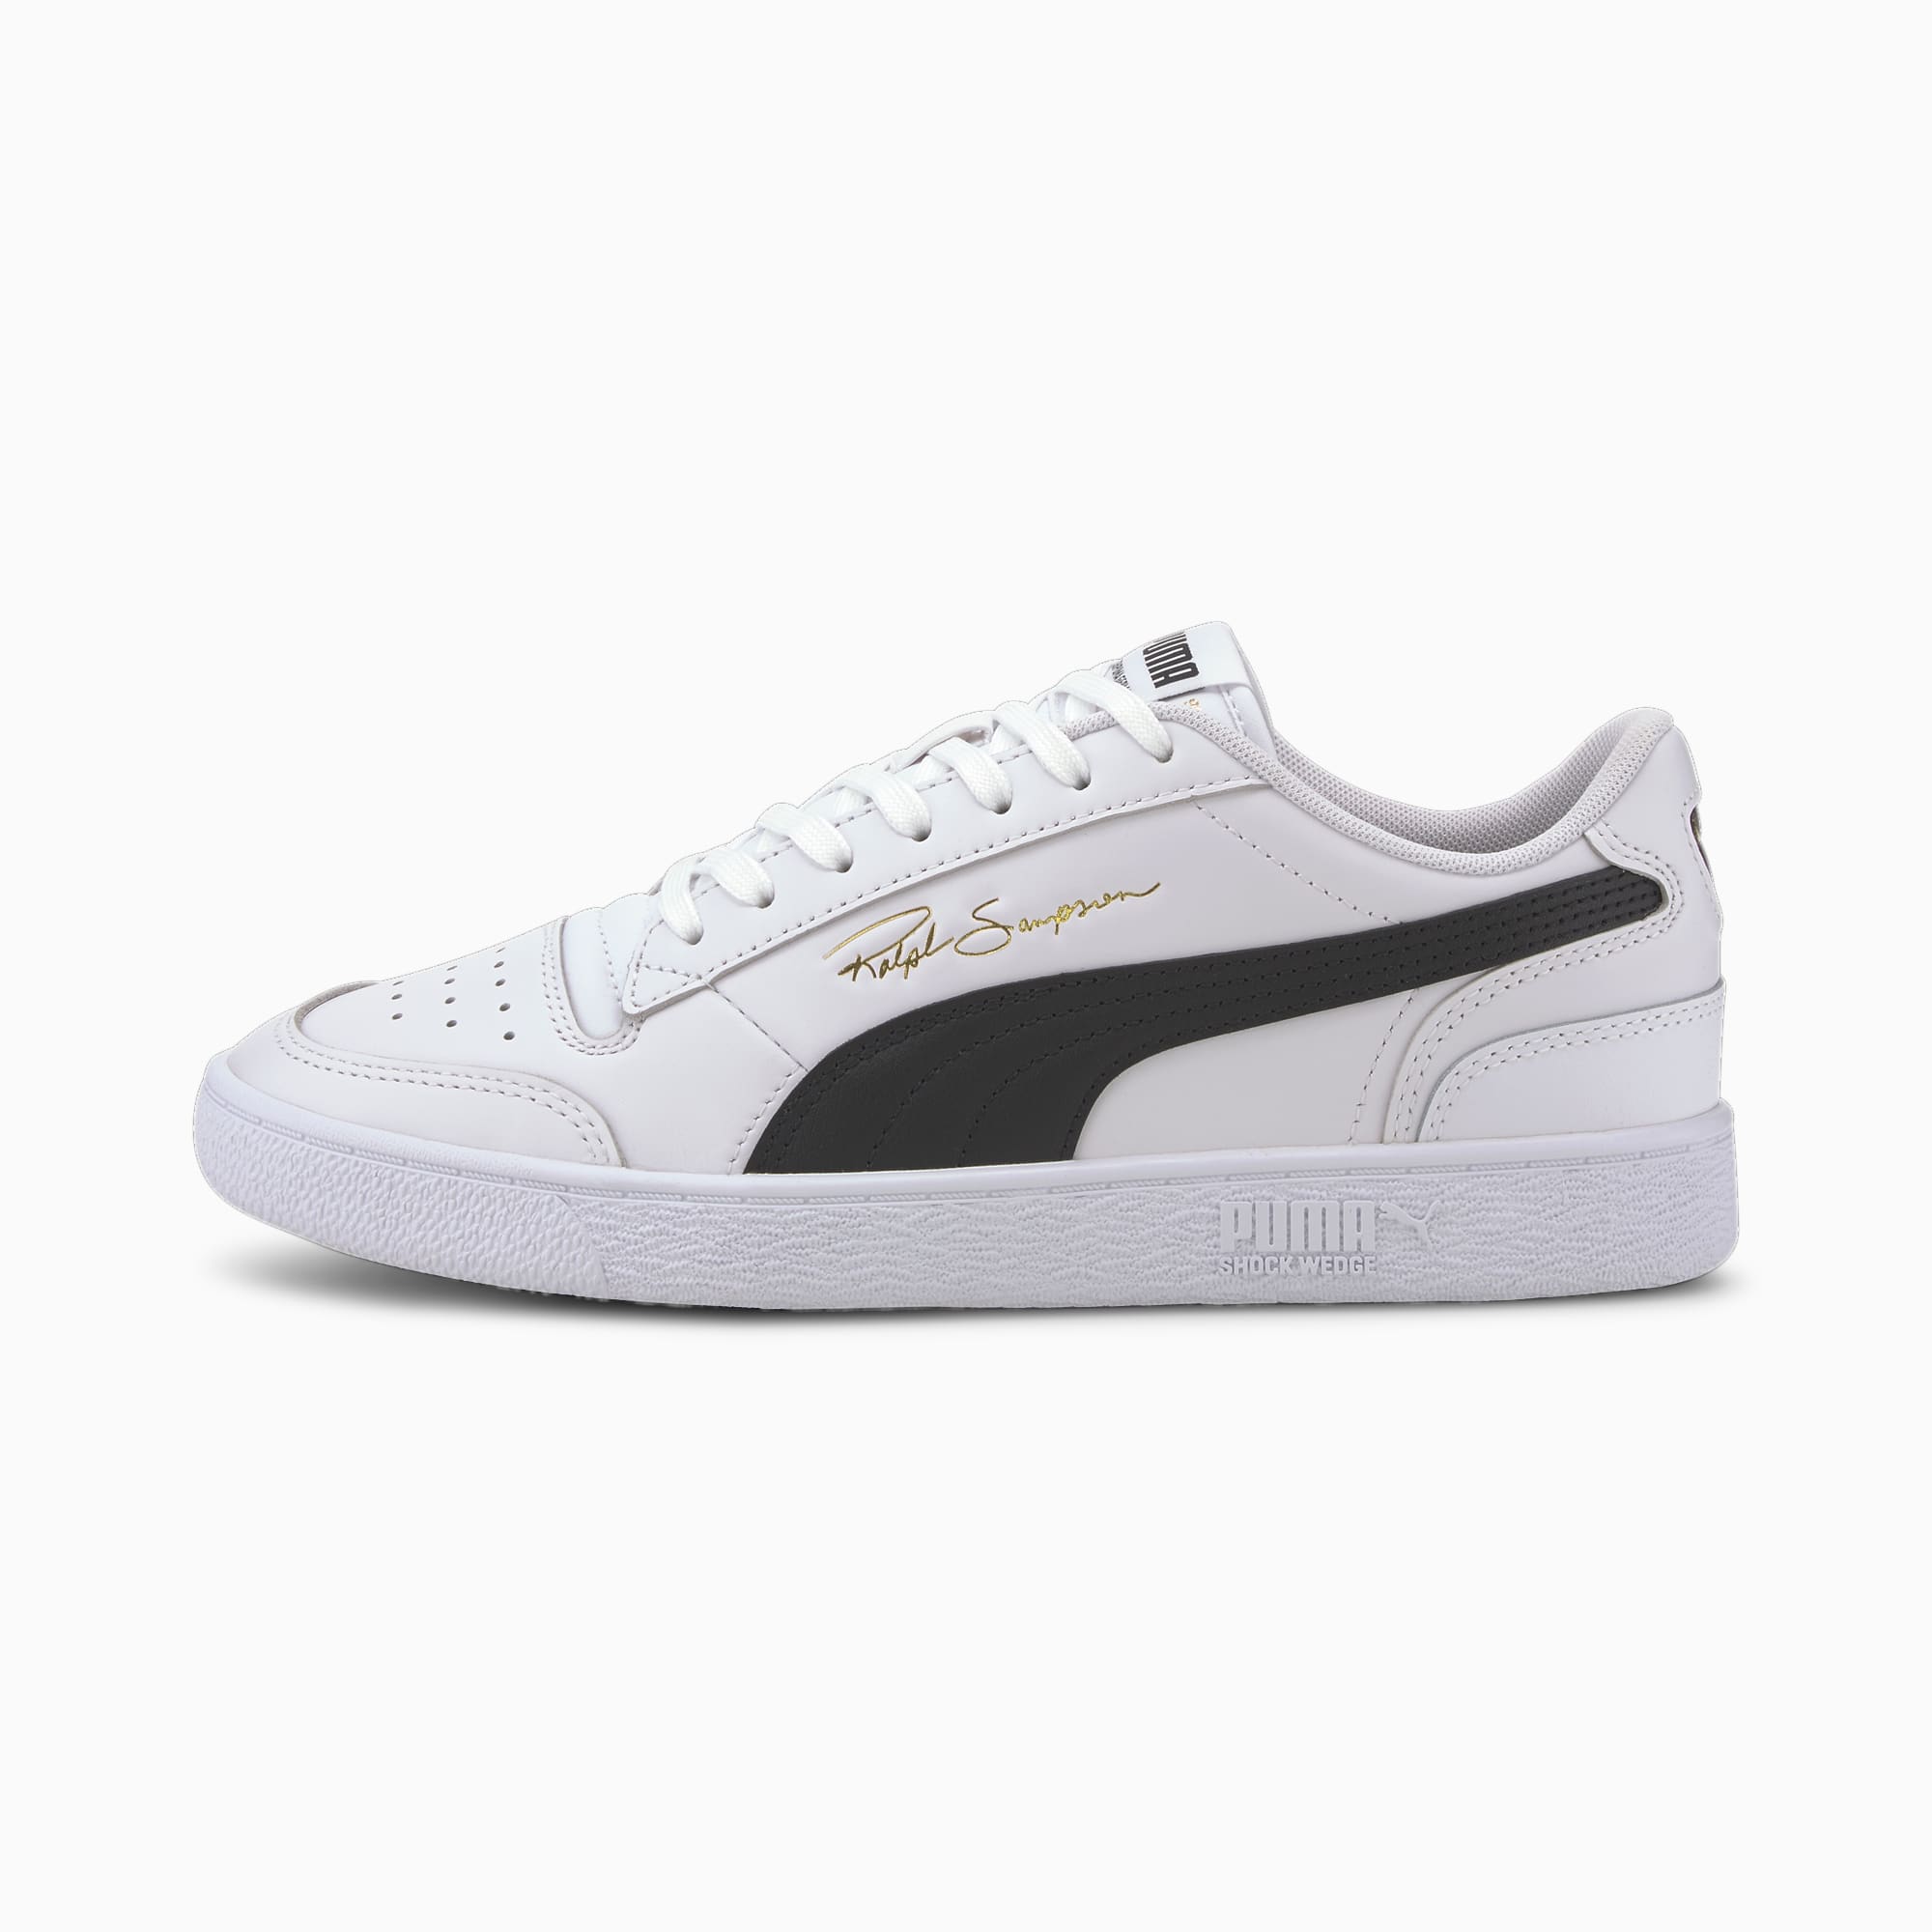 PUMA Chaussure Ralph Sampson Lo sneakers, Blanc/Noir, Taille 46, Chaussures